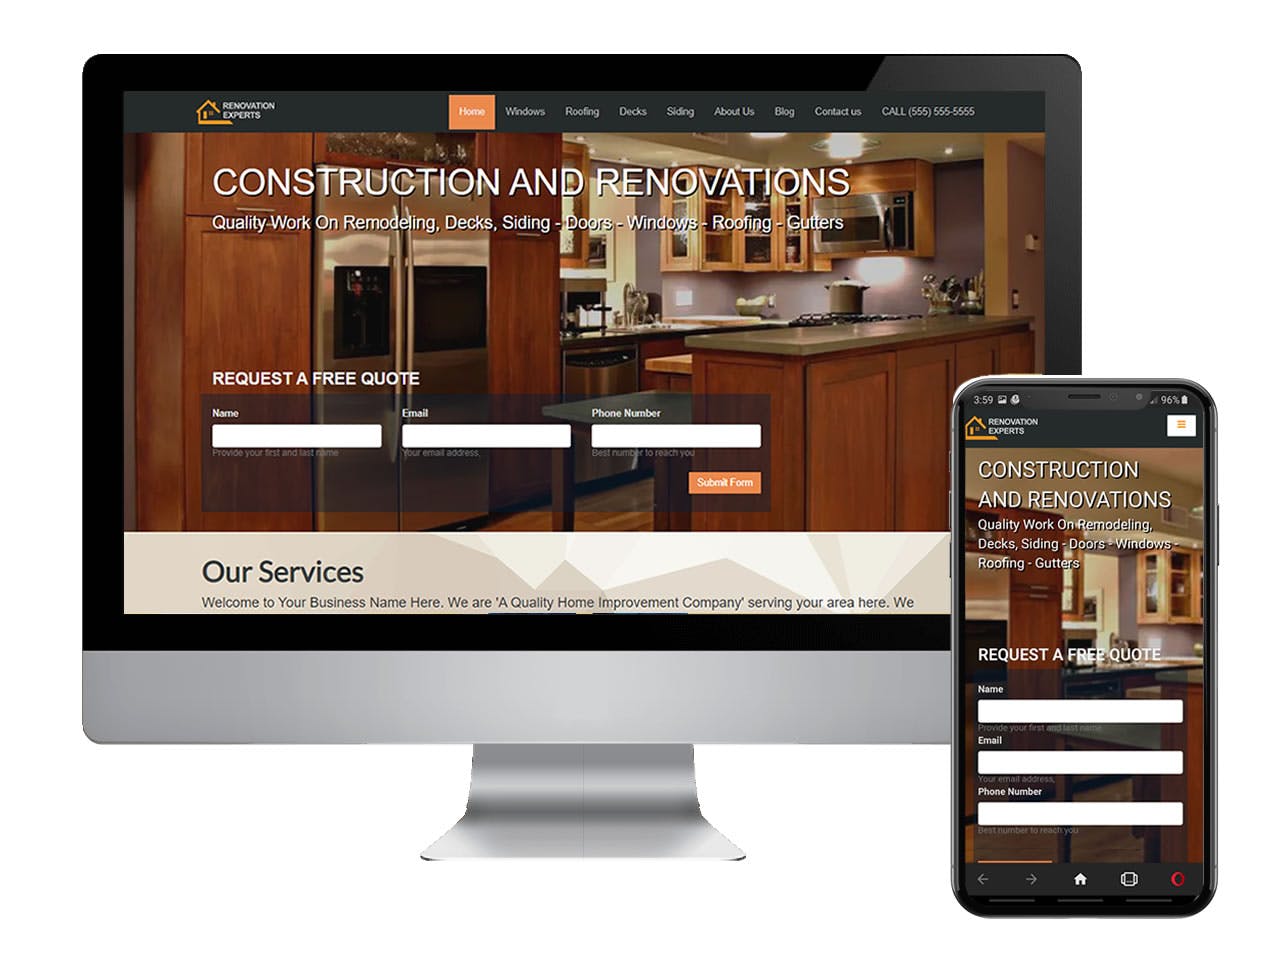 Contractor renovation template for mobile first website.